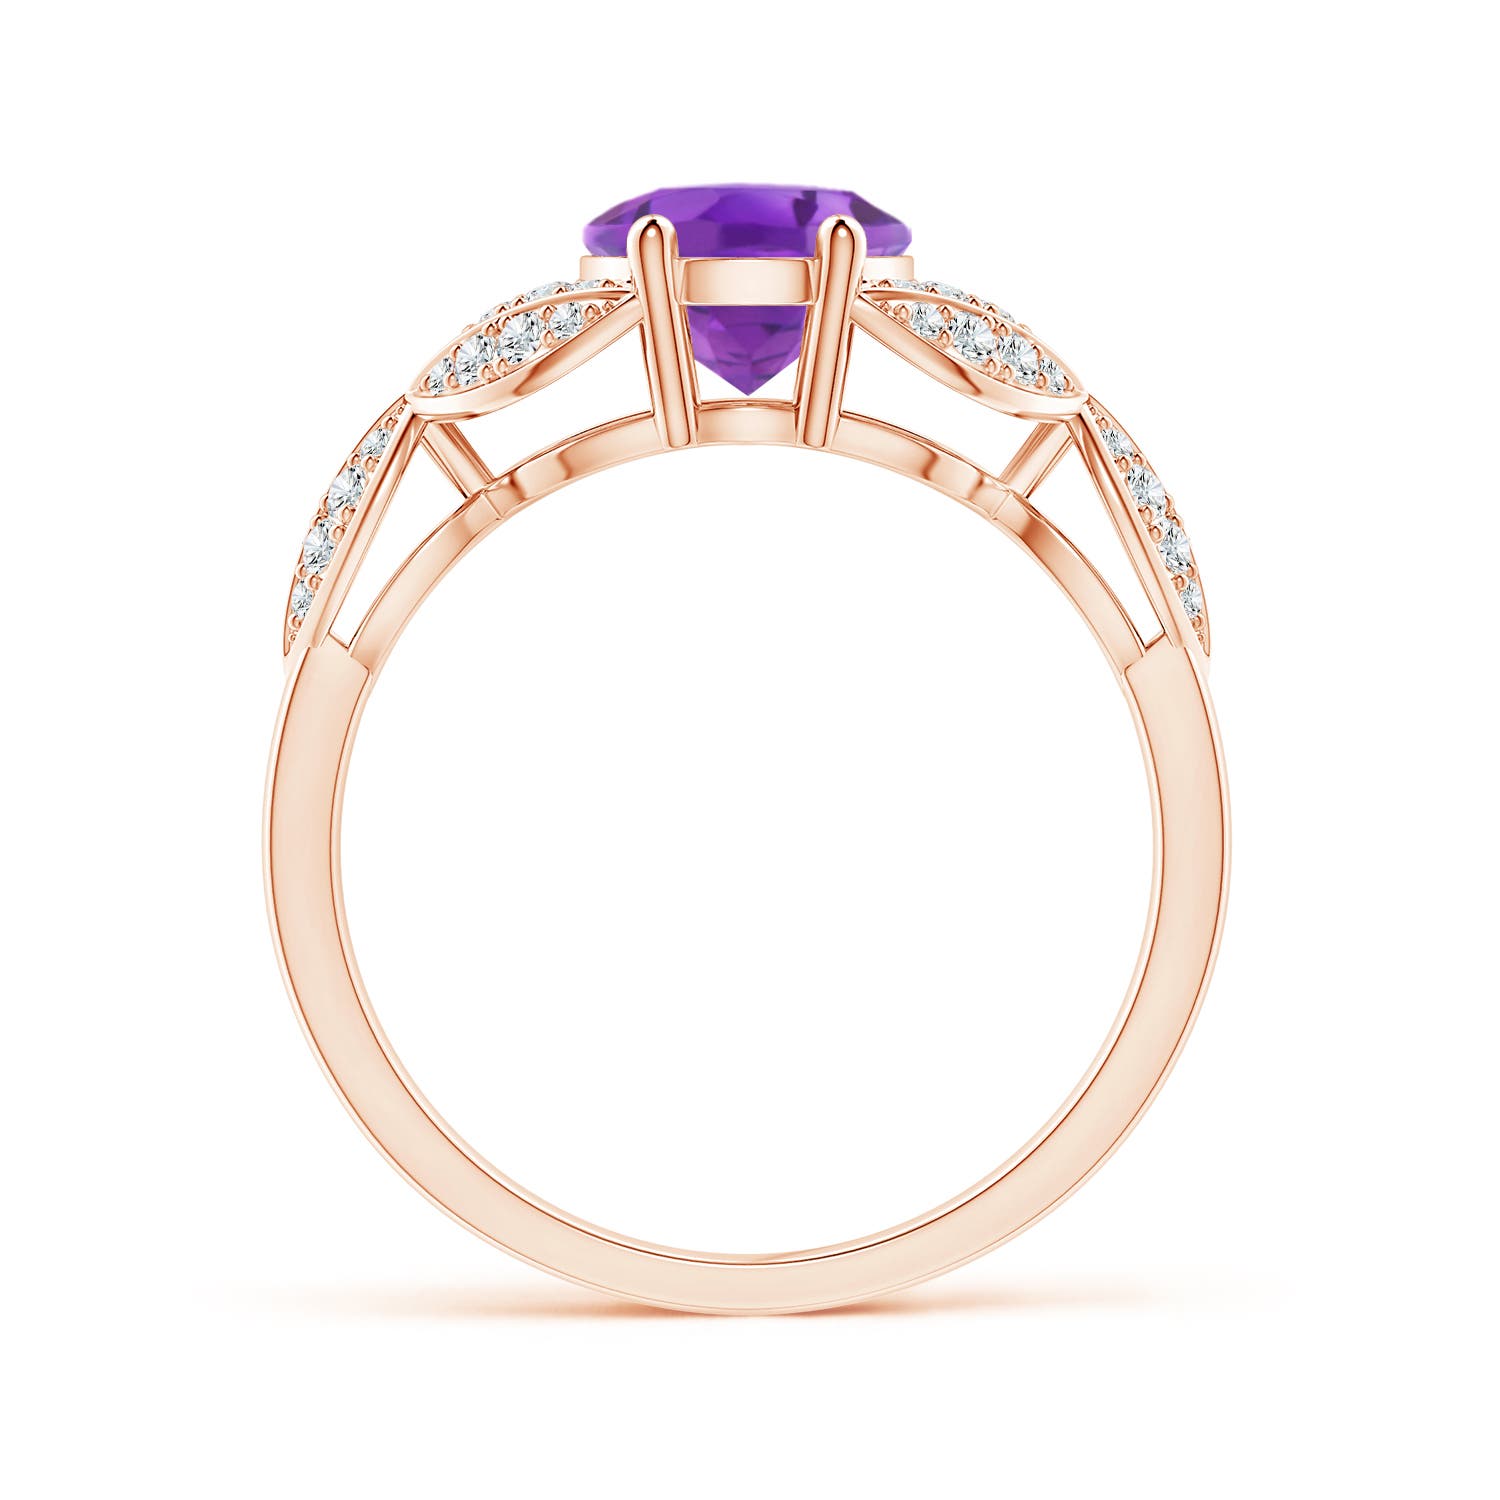 AA - Amethyst / 1.88 CT / 14 KT Rose Gold